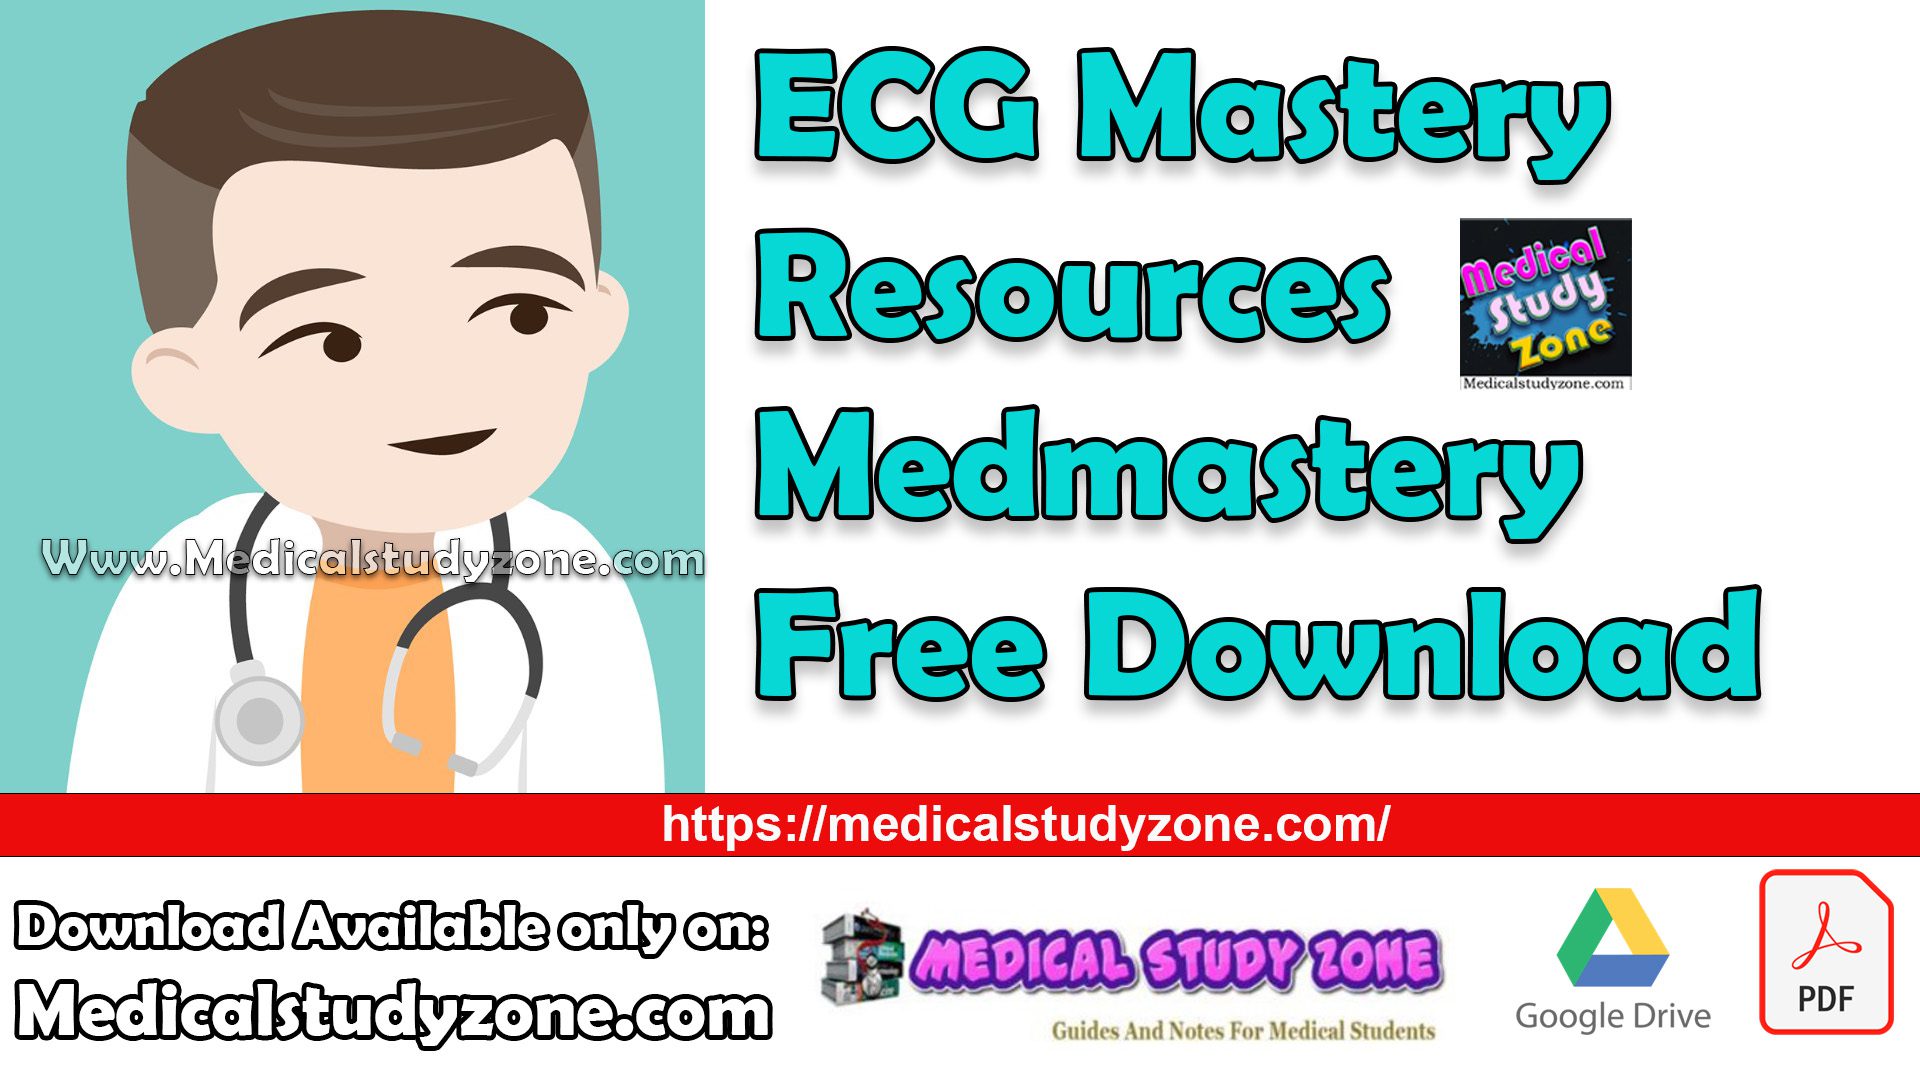 ECG Mastery Resources Medmastery Course Free Download